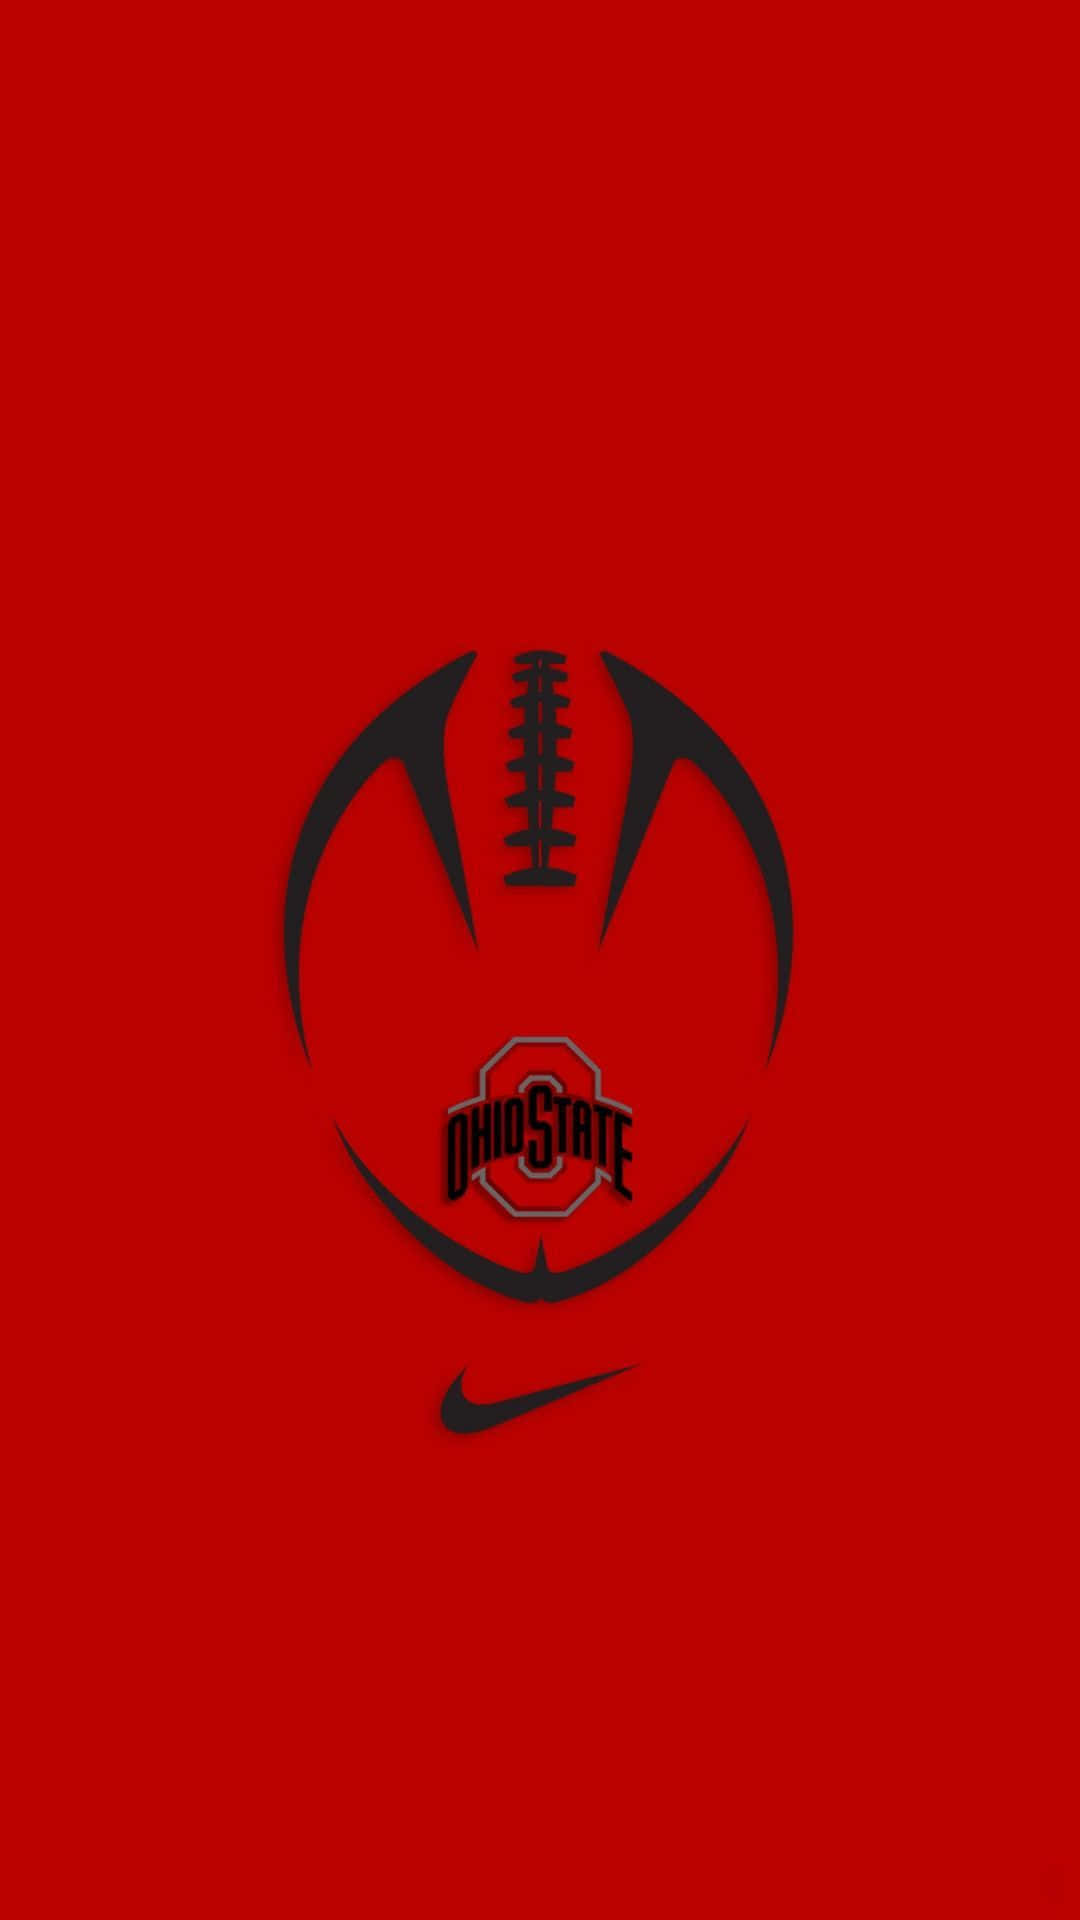 A Red Nike Football Logo On A Red Background Wallpaper